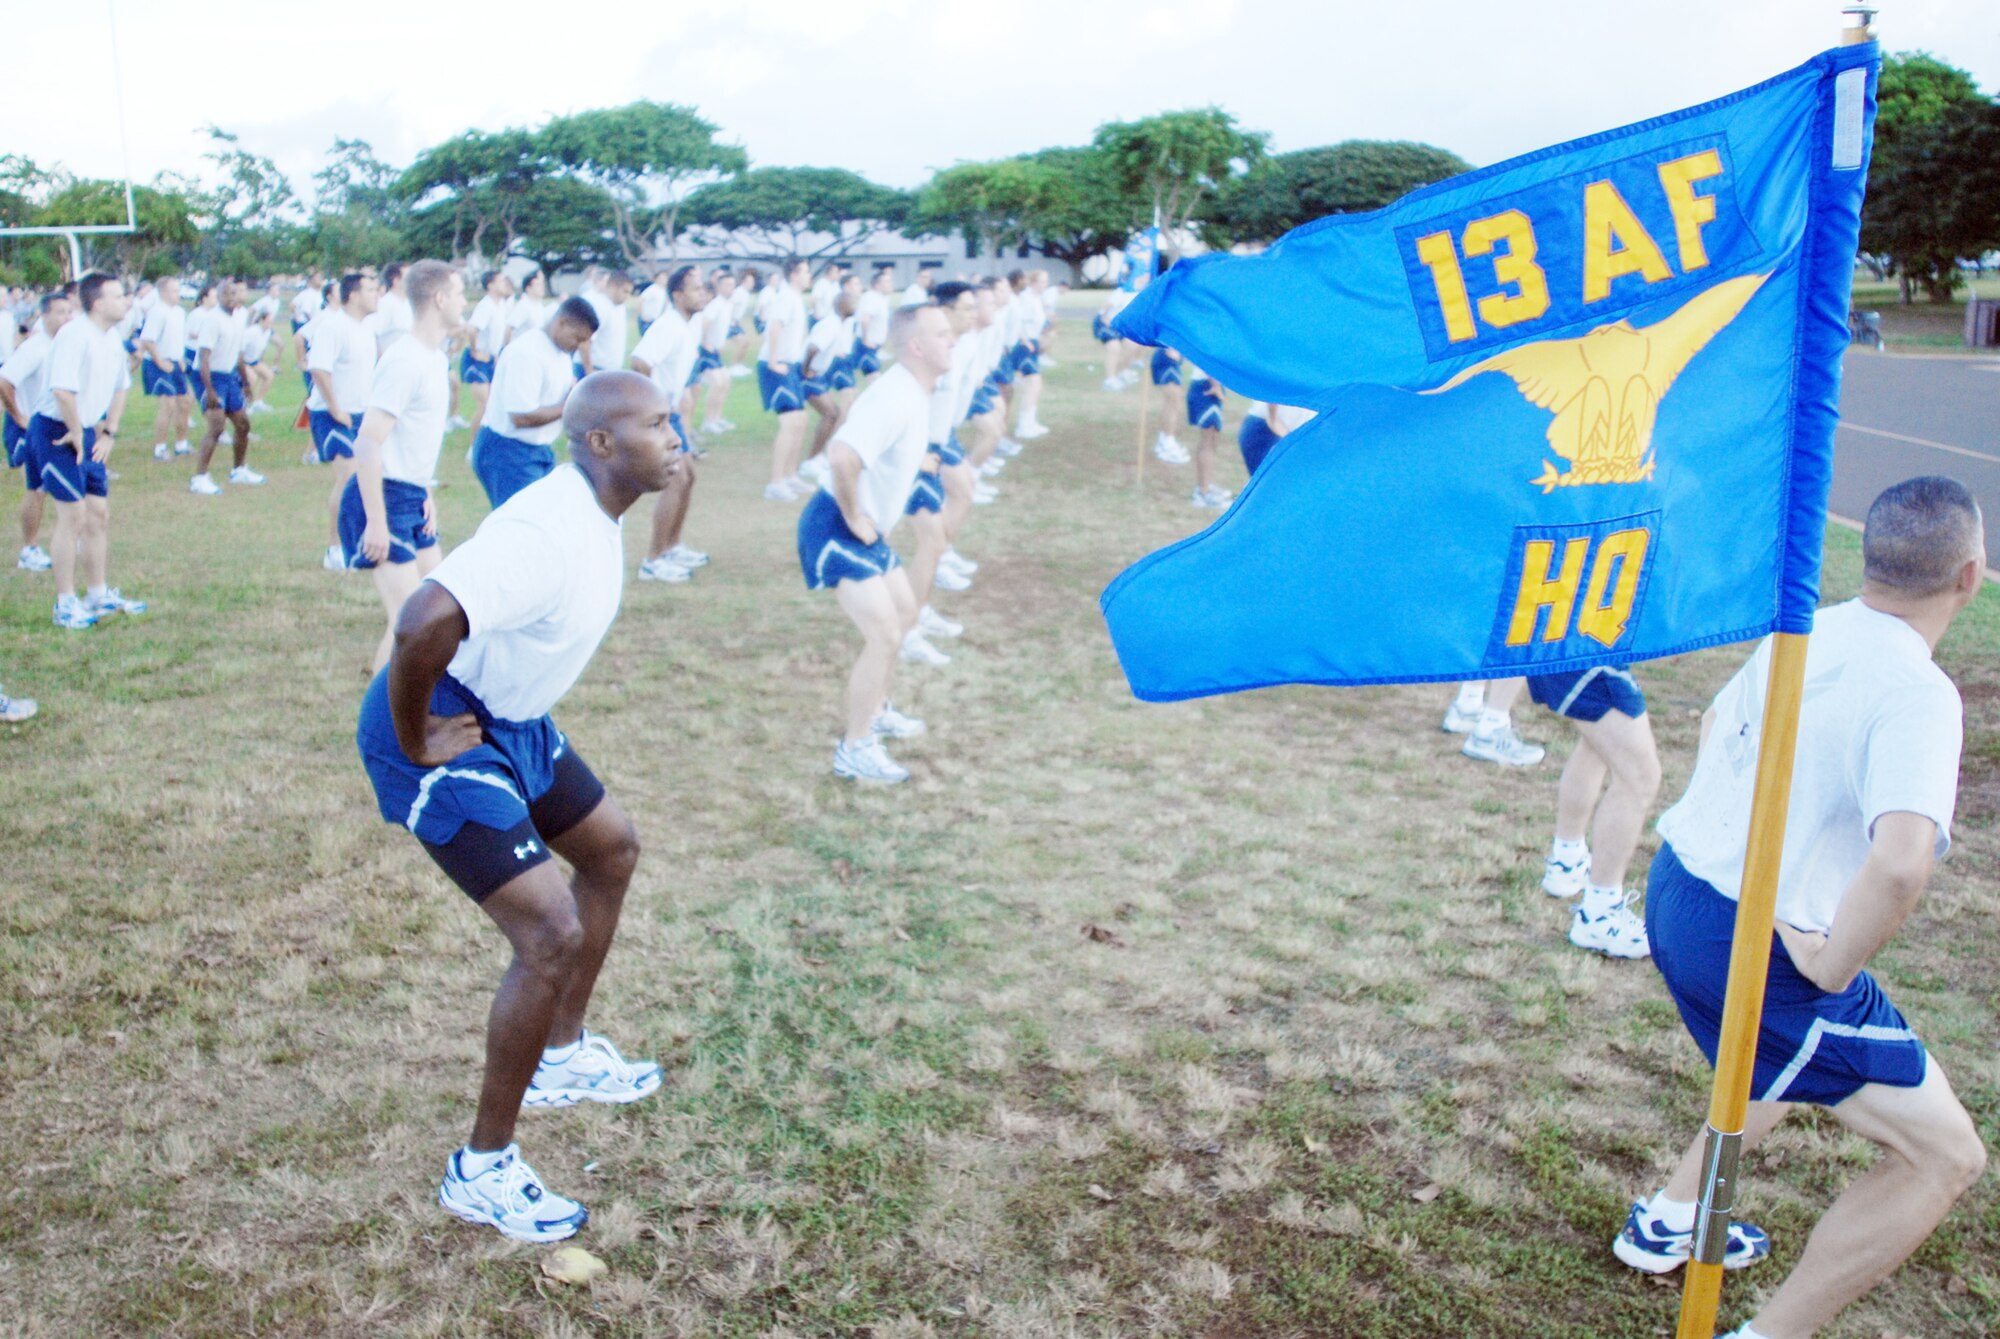 Members of 13th Air Force warm up before a warrior run during Jungle Day Nov. 13, 2009, at Hickam Air Force Base, Hawaii. The Jungle Day tradition originated when the organization was assigned to Andersen Air Force Base, Guam, and gives 13th Air Force members a chance to have fun and give back to the local community. (U.S. Air Force photo/Senior Airman Gustavo Gonzalez)